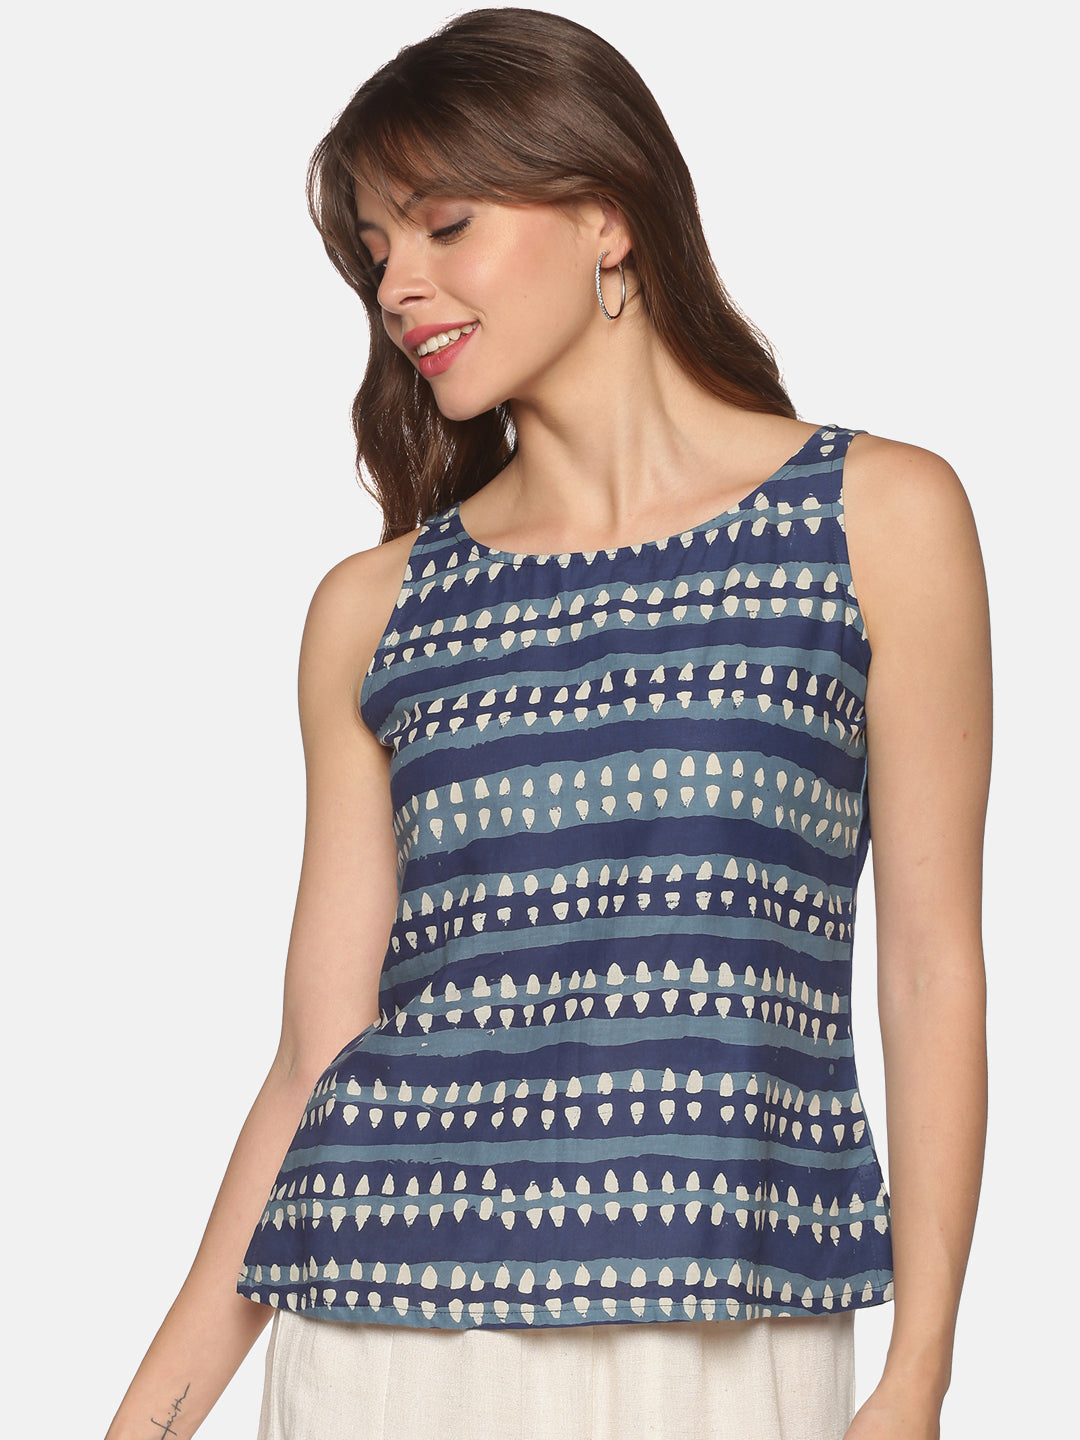 Blue Dhabu Printed Sleeveless Top with Back Button-Down Placket